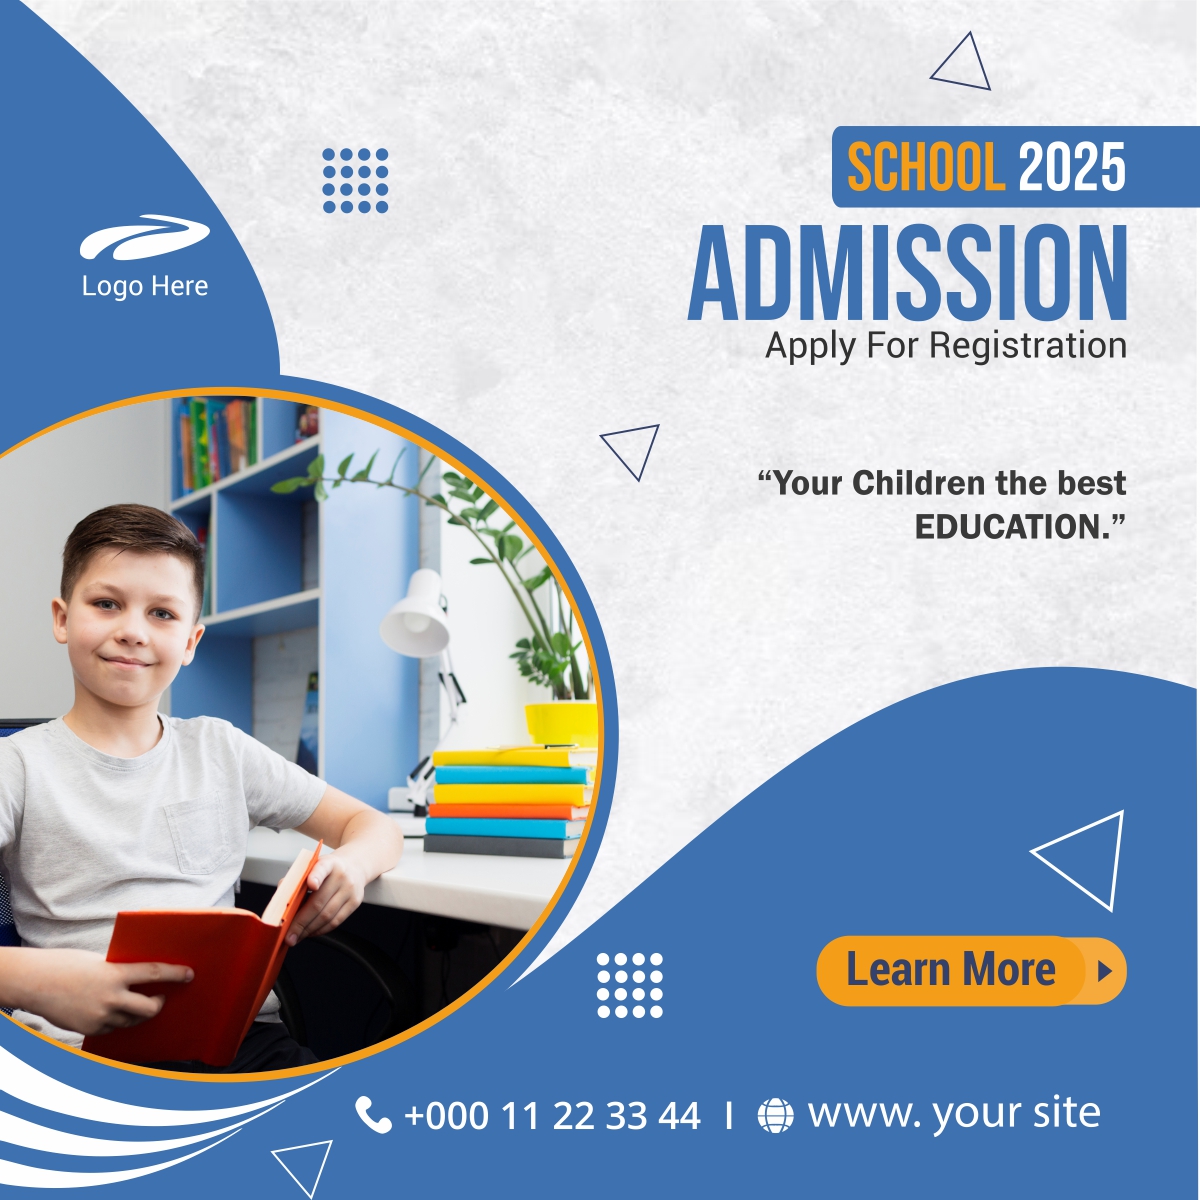 School Admission open 2025 banner design download for free